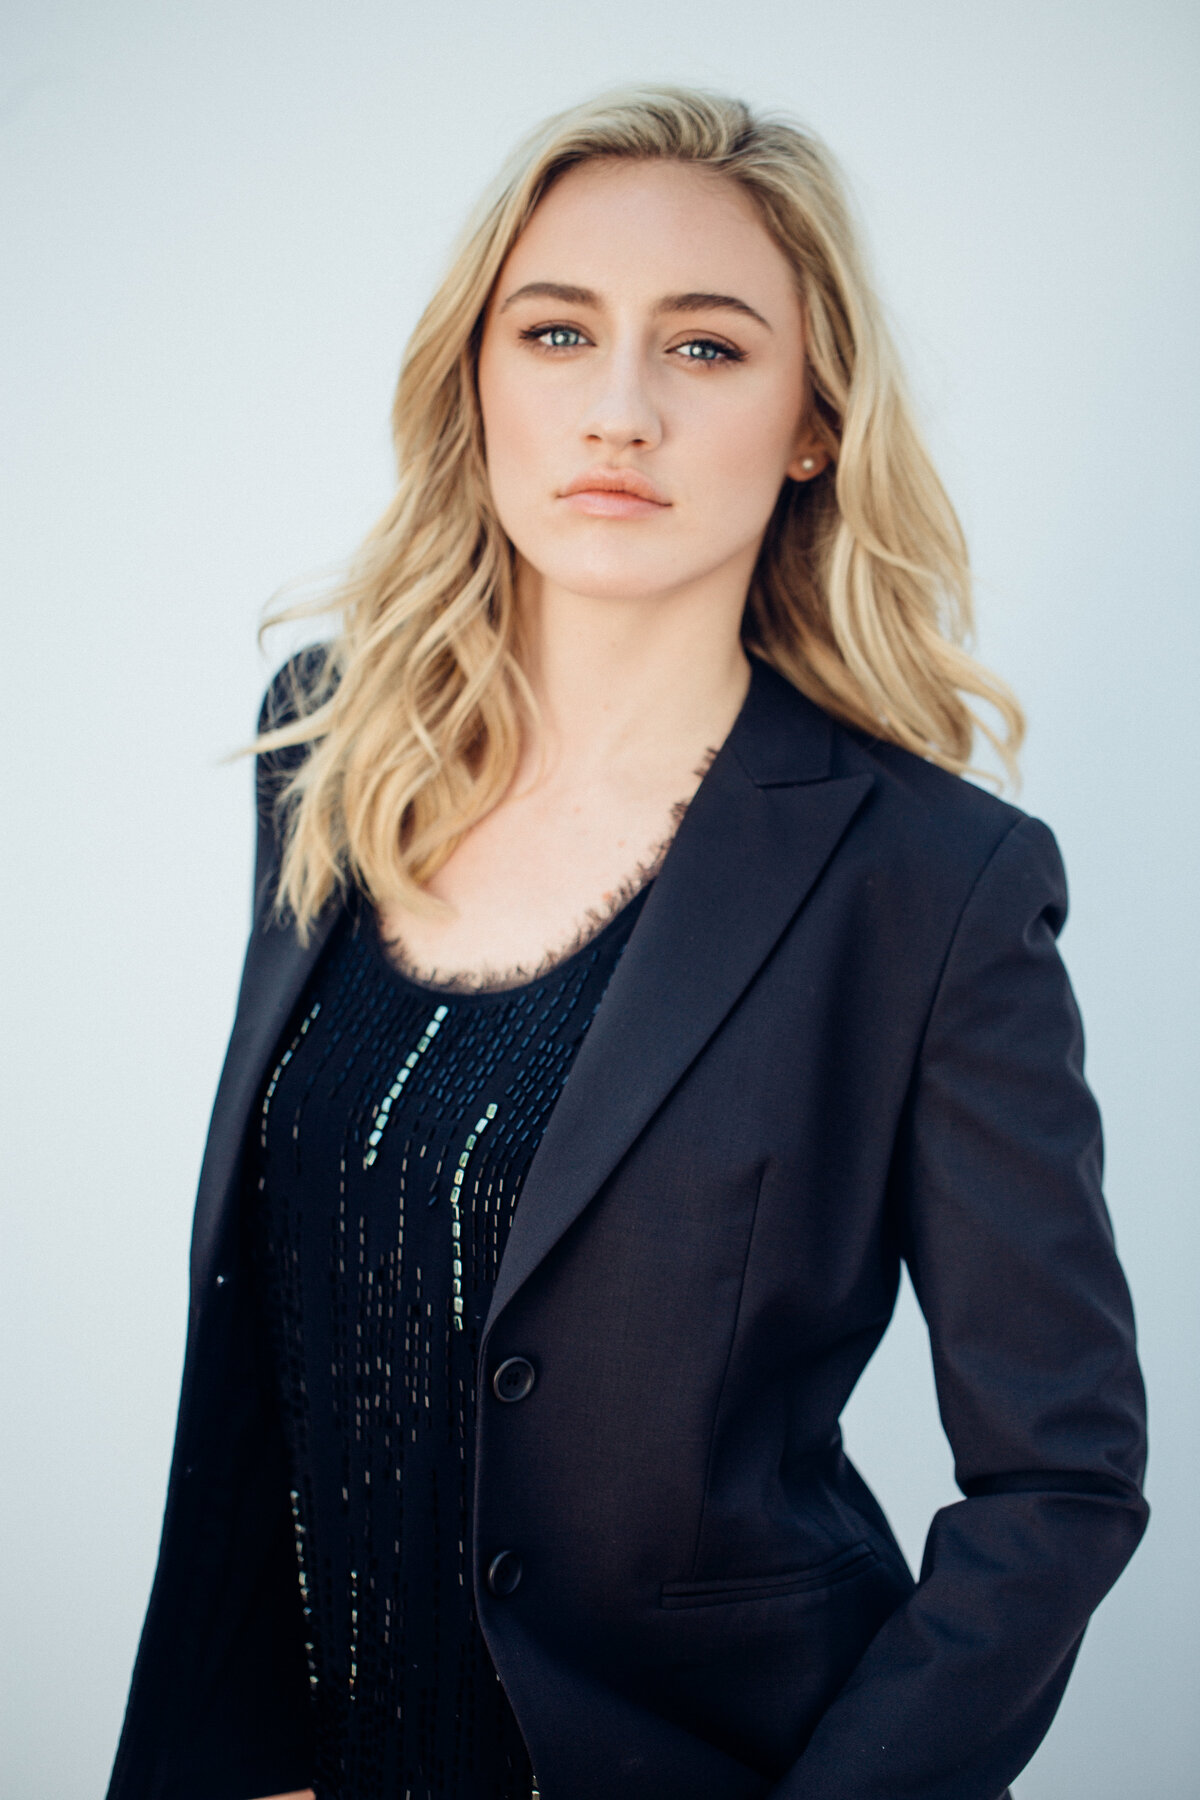 Headshot Photograph Of Young Woman In Outer Black Blazer And Inner Black Blouse Los Angeles